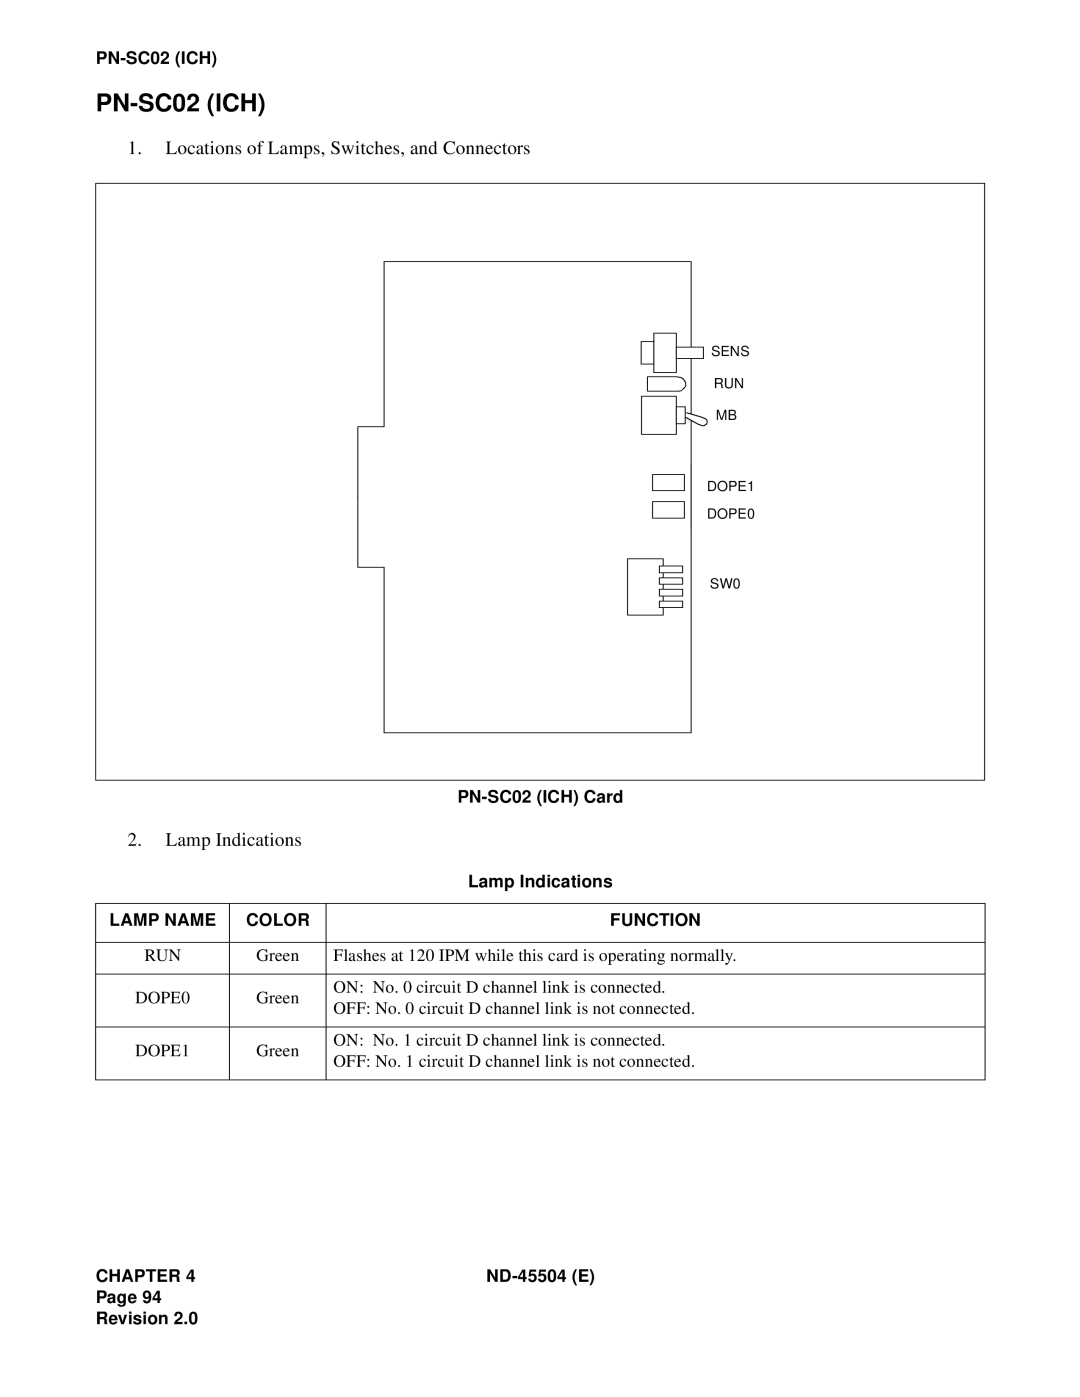 NEC 2000 IVS manual Locations of Lamps, Switches, and Connectors, Lamp Indications, PN-SC02ICH Card, Lamp Name, Color 